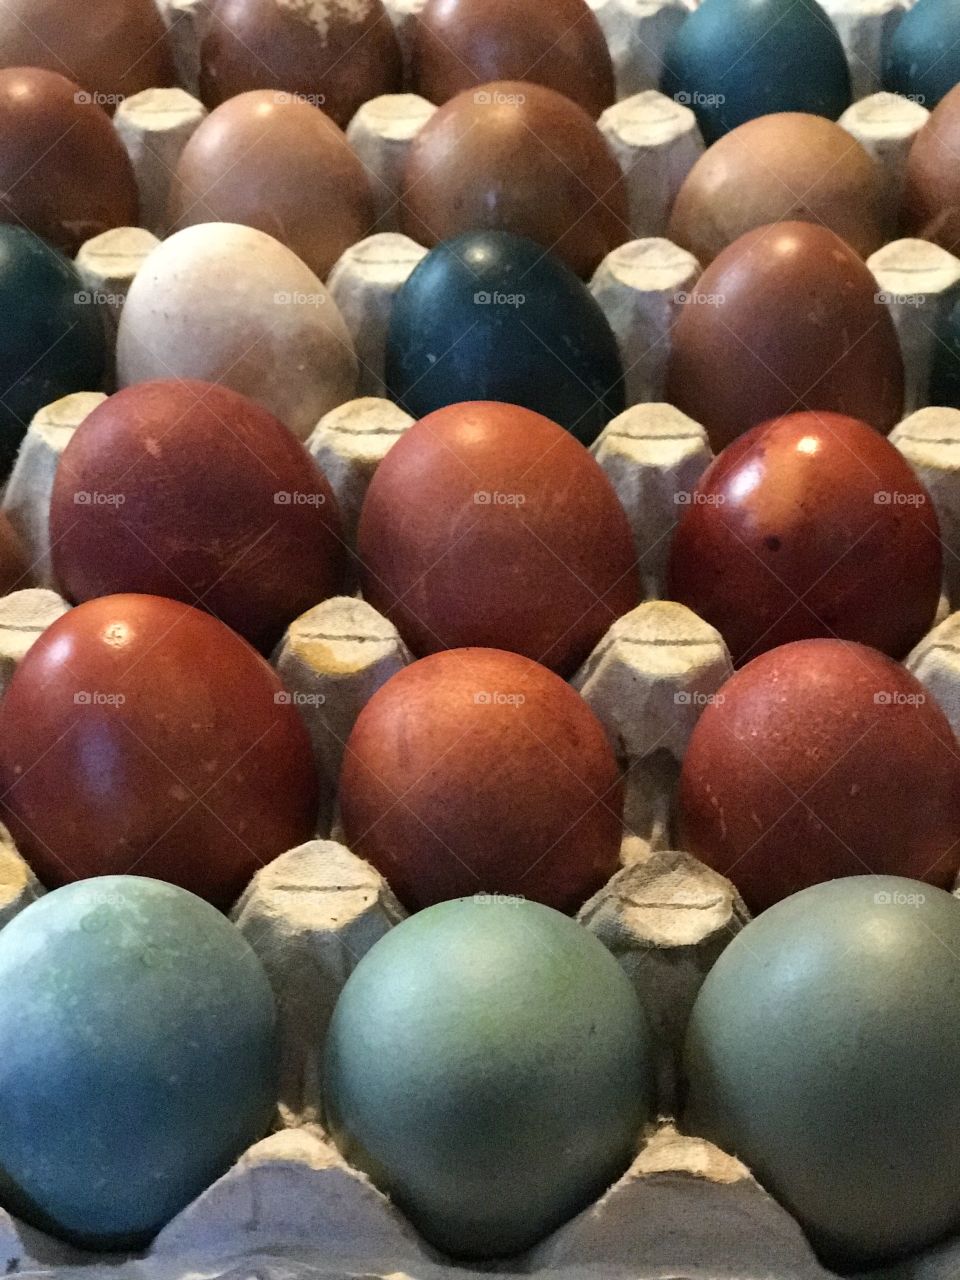 Many eggs painted at home with vegetables colors for Easter tradition